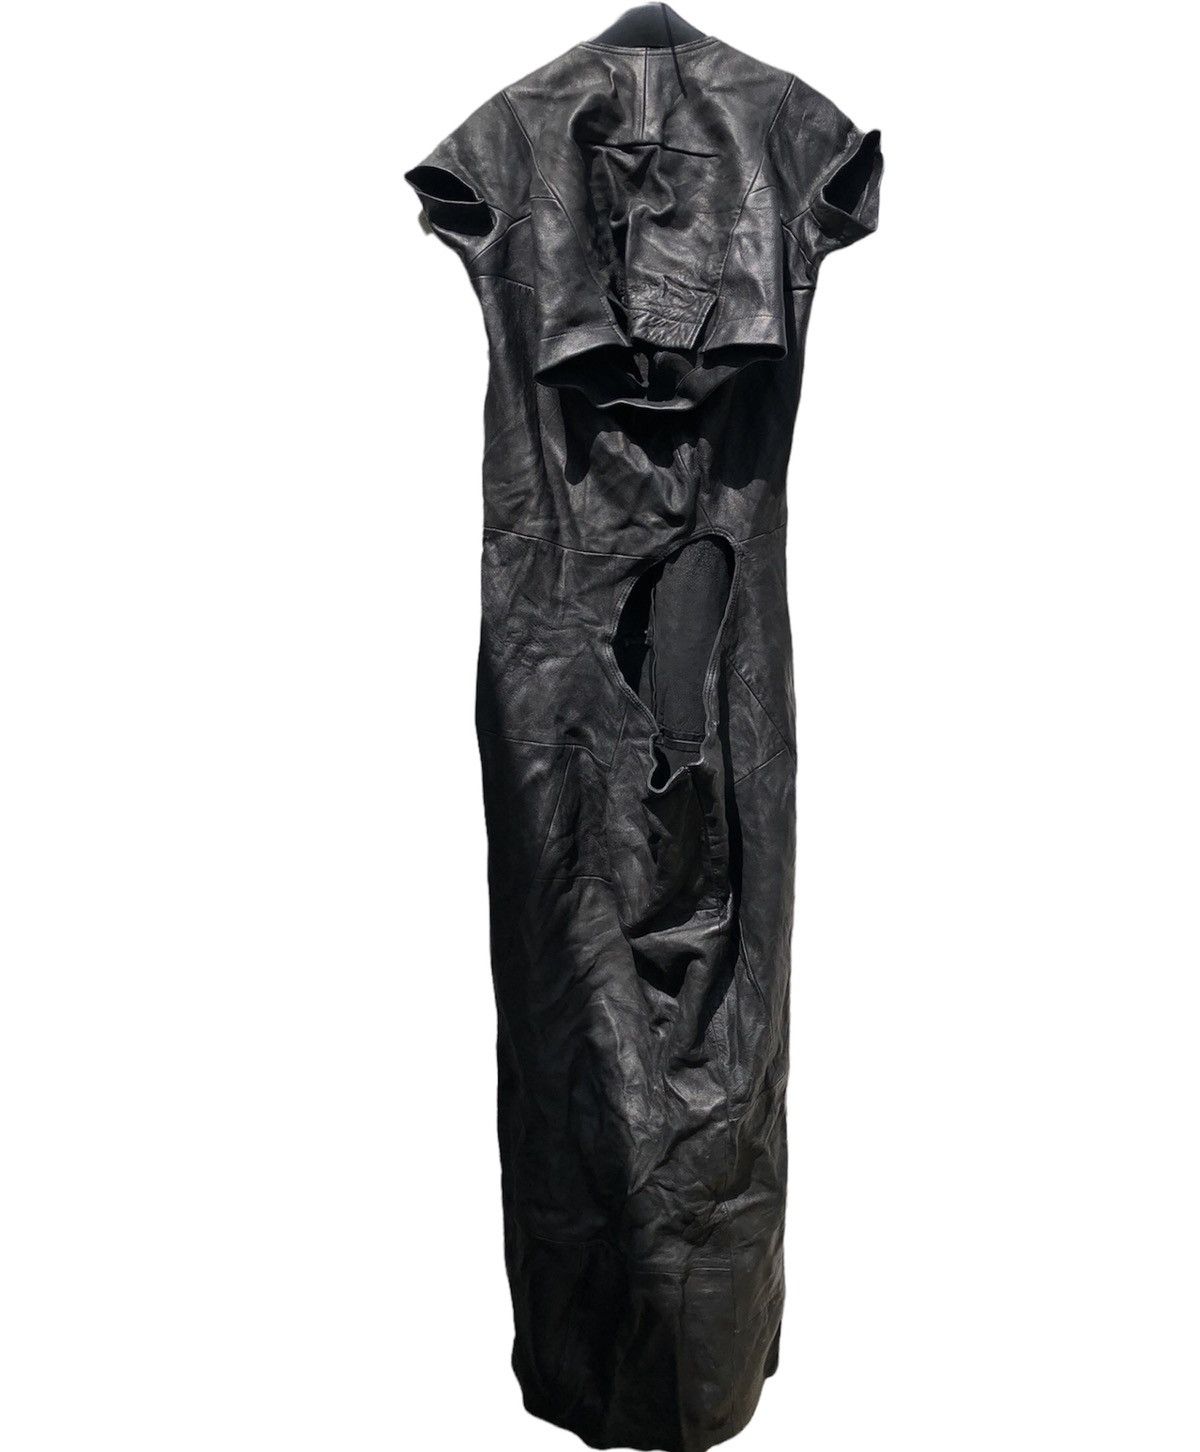 ARCHIVED JUNYA WATANABE AD 1996 PATCH MUTTON LEATHER DRESS - 5